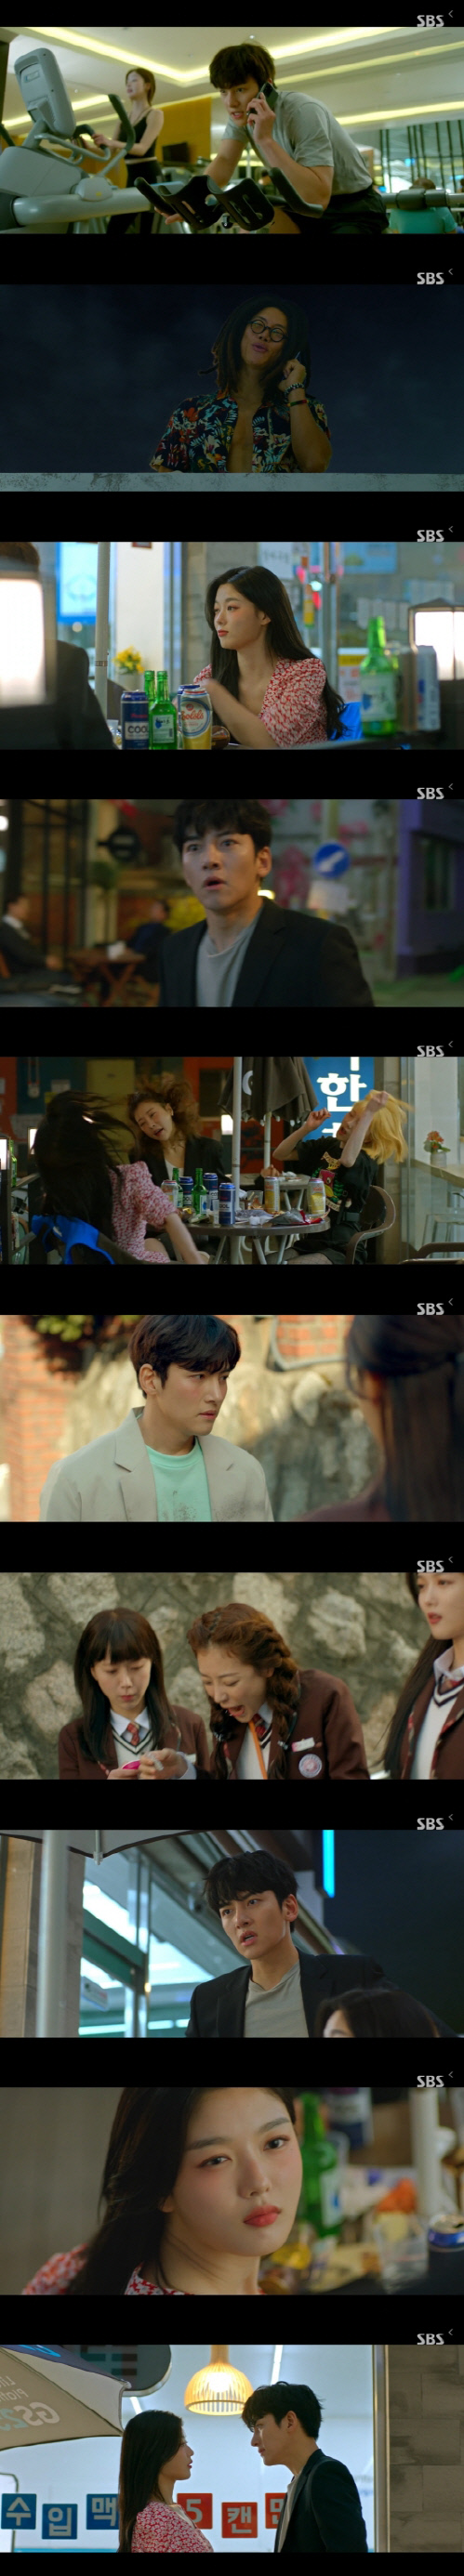 In the first episode of SBS gilt drama Convenience store Morning Star, which aired on the 19th, Kim Yoo-jung was shown as a part-time student of Choi Dae-heons Convenience store.Choi Dae-heon is eventually notified of her separation, even though she saved a young cat who fell into a sewer.Choi Dae-heon, who is in the pain of parting, abandons the dolls, and the star finds Choi Dae-heon and asks for a cigarette errand.Choi Dae-heon seemed to run errands, but he advised him to walk youth to a better job, and the star gives Kiss to such Choi Dae-heon.Three years later, Choi Dae-heon quit the company and became the manager of a Convenience store, and had a busy day as a manager of the flower shop, but it did not help sales.Jung Sae-byeol came as a part-time student and did his best to be recruited.In the end, Choi Dae-heon fell asleep and the Convenience store became phosphoric acid when the star worked.Choi Dae-heon tried to drop the star but failed.The star was temporarily working, and in the meantime, 500,000 won in cash was lost and Misunderstood was received, but it was taken by Choi Dae-heons mother.It is not like this once or twice, said Jeong Sae-byeol.But Choi Dae-heon was sorry for Missunderstood the star, and apologized.The anger of the star was solved, but soon I learned that Choi Dae-heon had a GFriend flexible stock (Han Seonhwa).It was a star that asked, Did you spray perfume to see me? But he was also due to dinner with GFriend.But the star did not panic and told Choi Dae-heon, I will fall in love with me.At the end of the broadcast, Chung Sae-sung was pictured playing a drinking party with his friends at the Convenience store, and Choi Dae-heon, who was surprised to see this, hurriedly returned to the Convenience store while dating Yoo Yeon-ju and the gym.Choi Dae-heon, who saw the star of the star, said, What is it? However, the star of the star of the star of the star of the star of the star of the star of the star of the star of the star of the star of the star of the star of the star,It airs every Friday and Saturday at 10 p.m.Photos  SBS